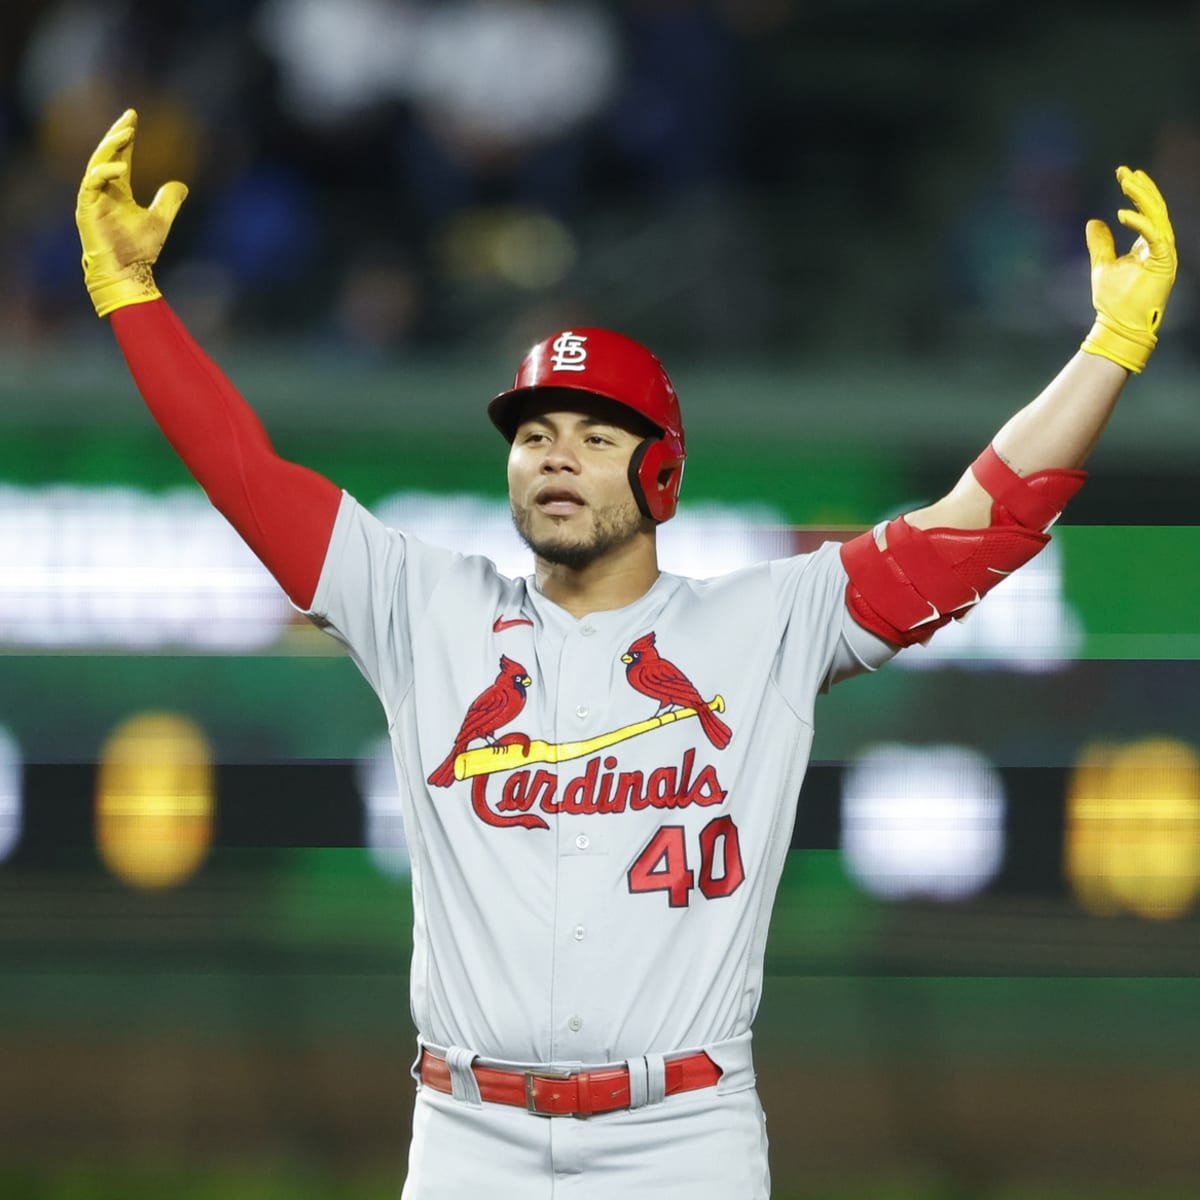 St. Louis Cardinals: Who should be the starting catcher upon Yadi's return?